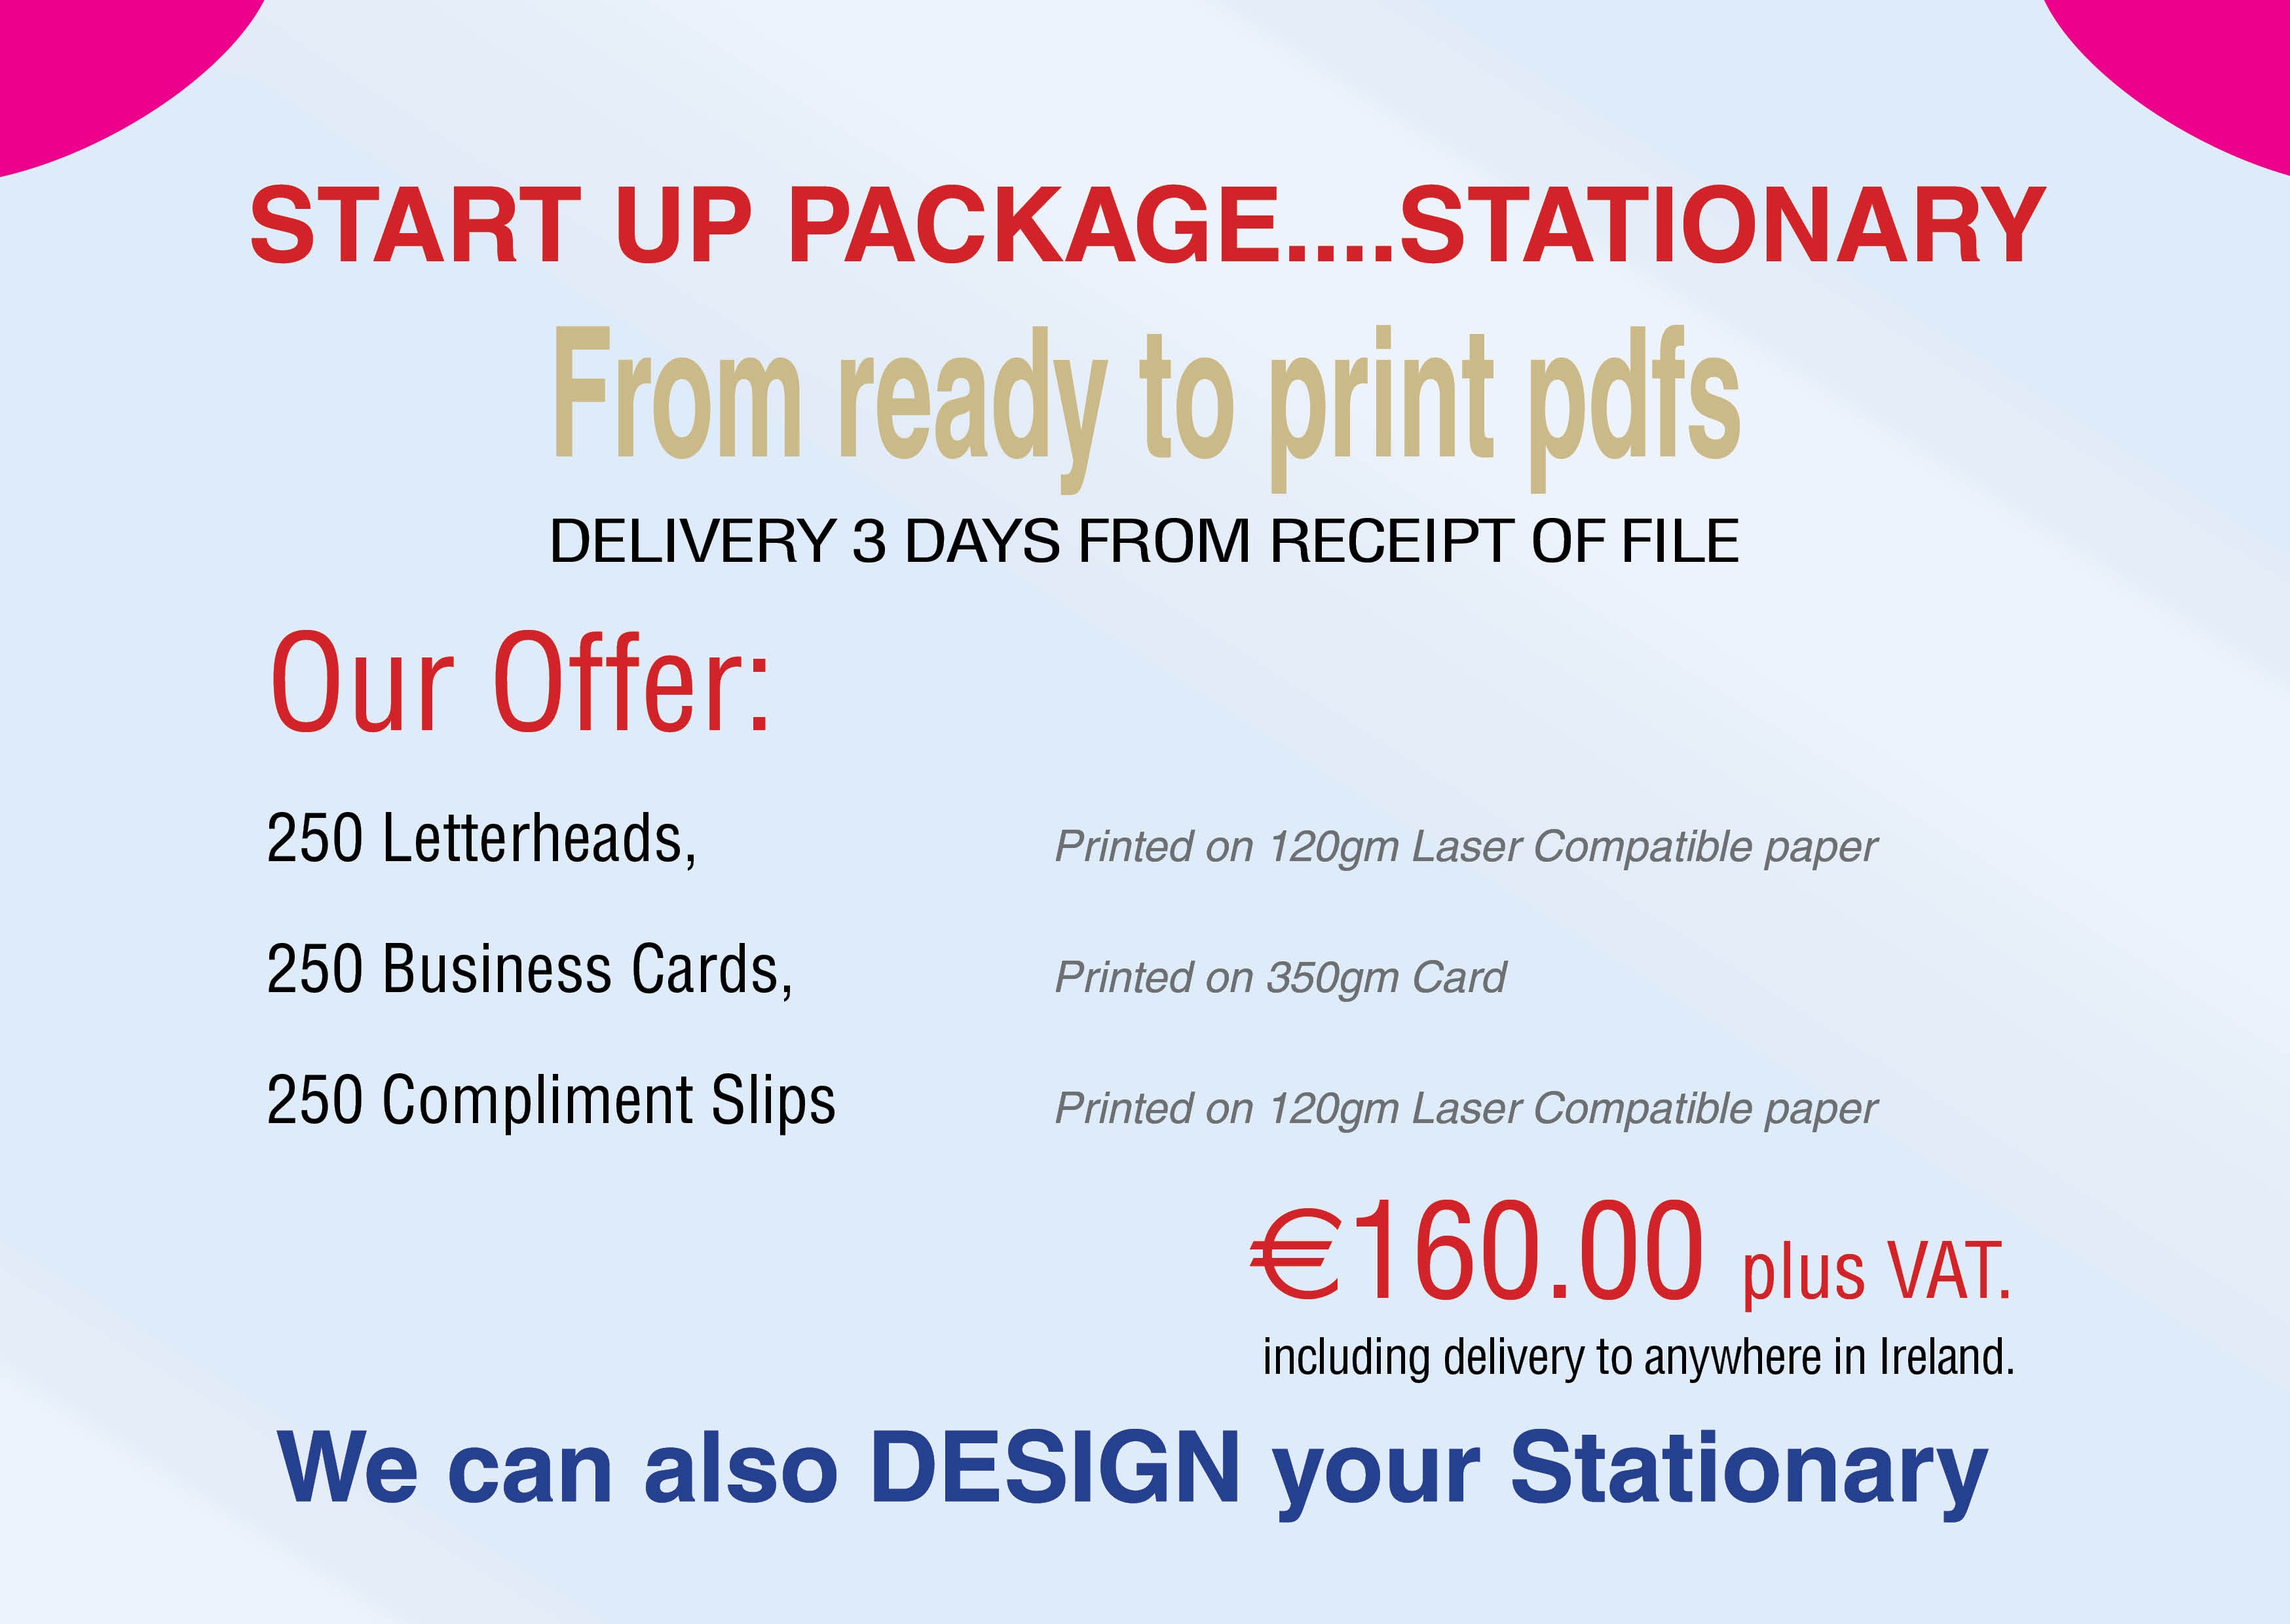 €149 Stationary Startup Package. Was €160 250 Letterheads, Compliment Slips & Business Cards